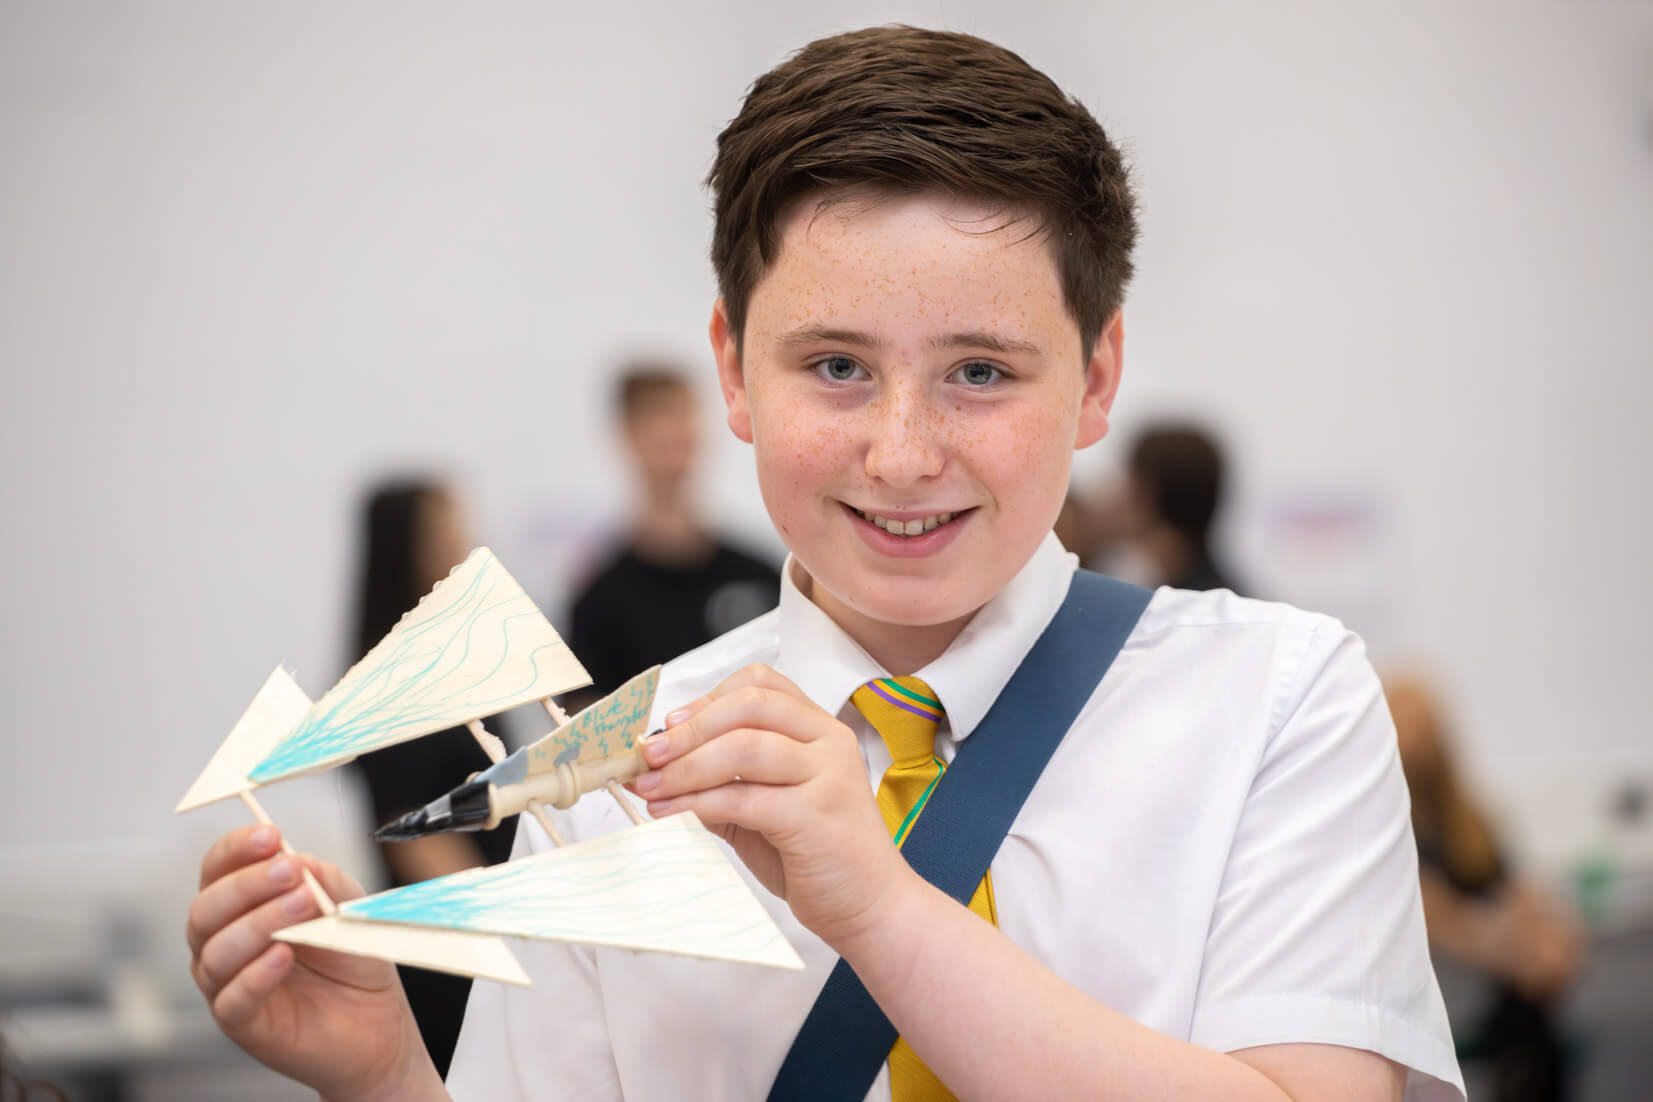 Teams of pupils from 16 schools worked on the design and manufacture of a real-life item in the shape of an aircraft